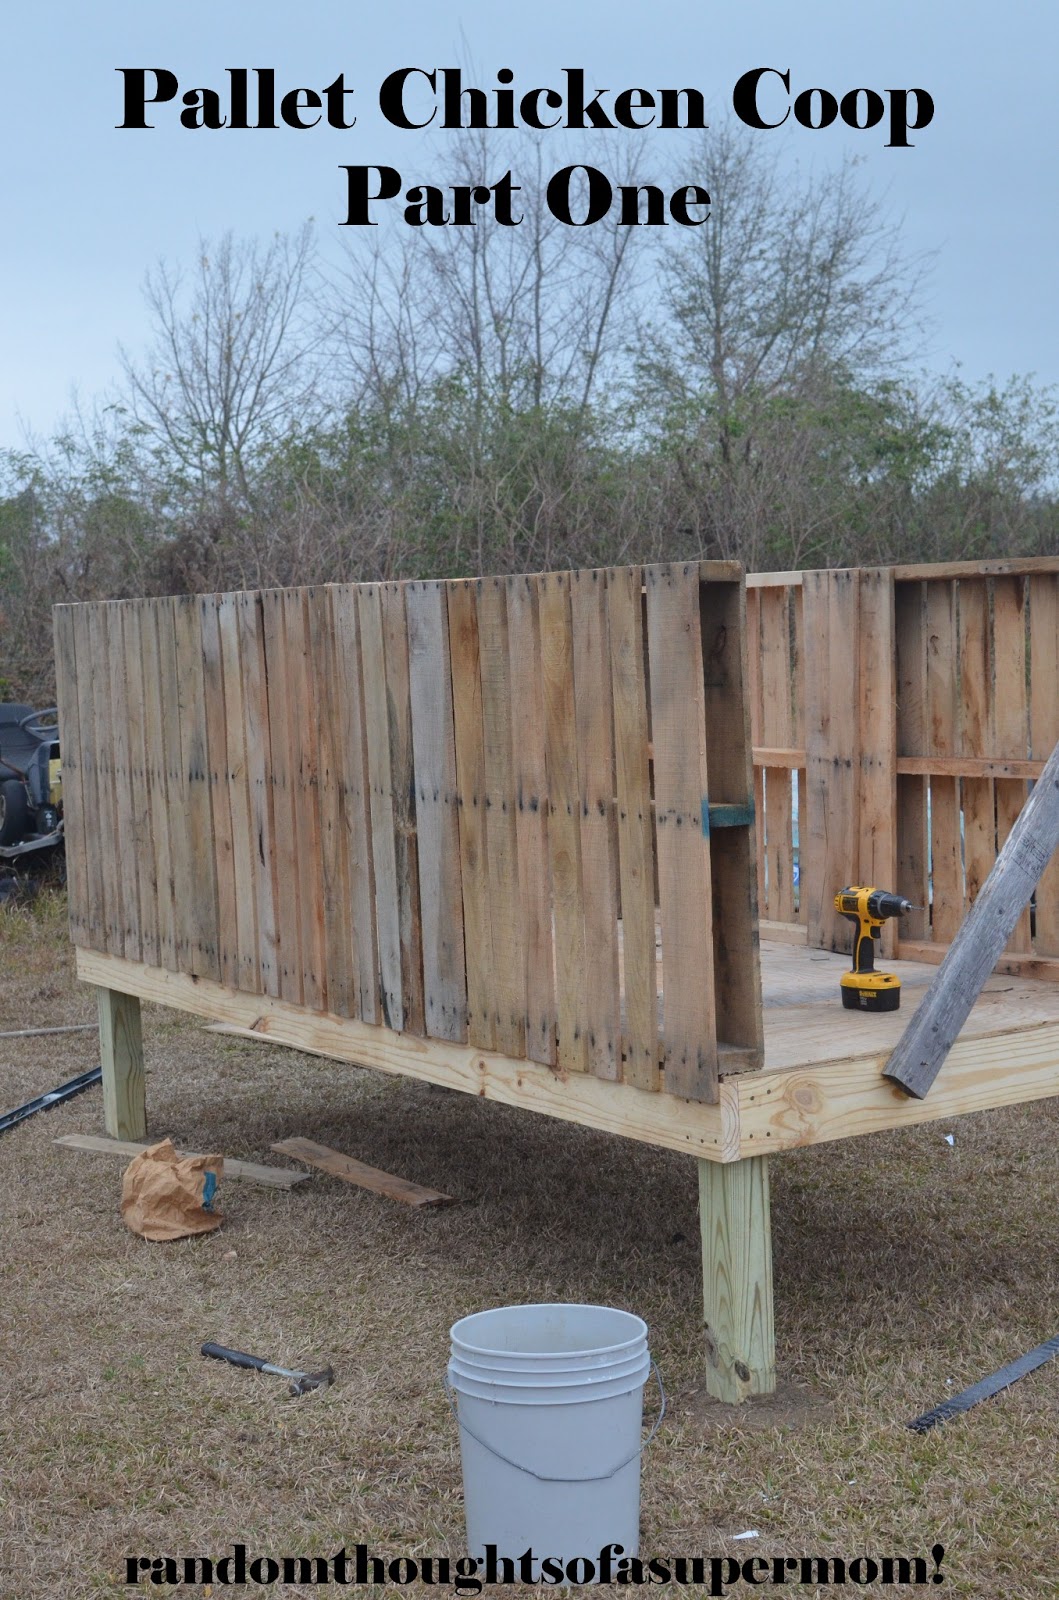 Random Thoughts of a SUPERMOM!*: Pallet Chicken Coop: Part One